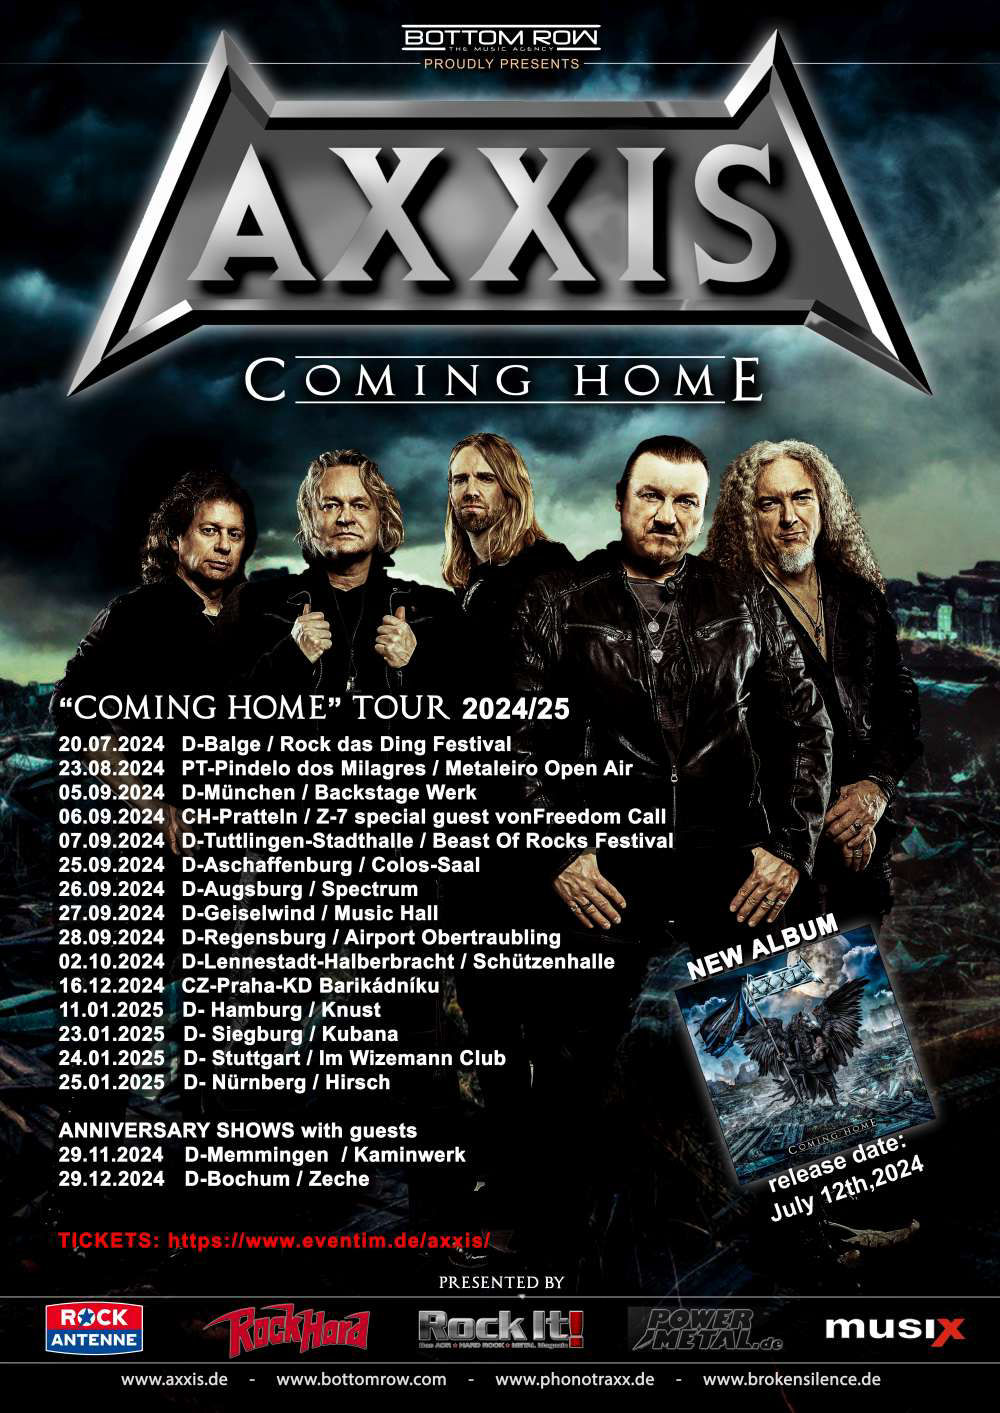 AXXIS Tour 2024 Coming home